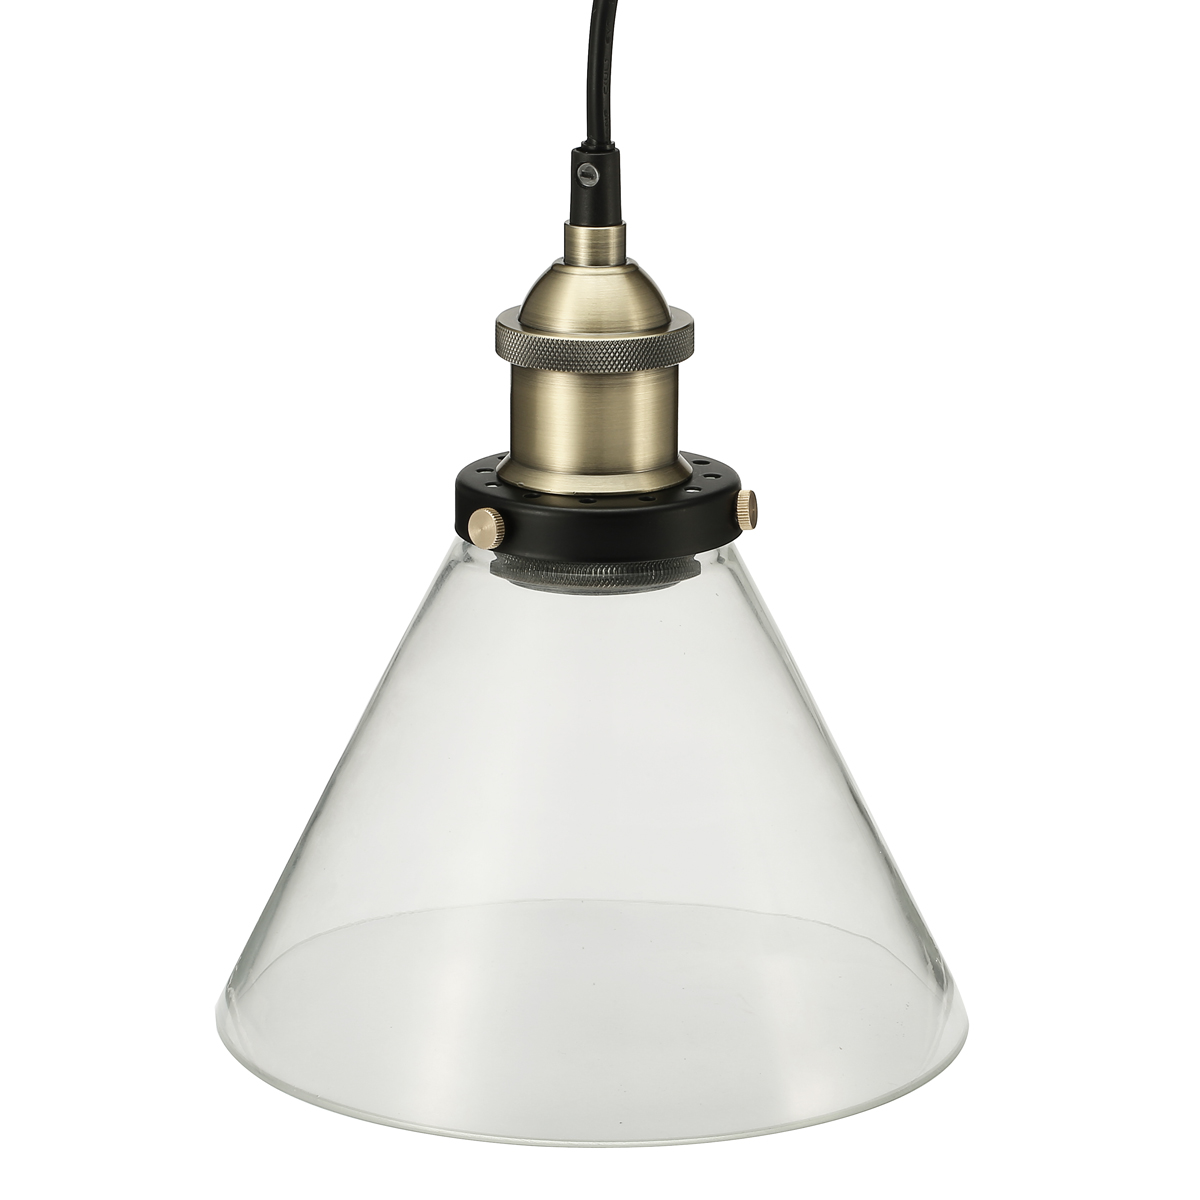 Find KingSo 110V/220V E26/E27 Vintage Industrial Pendant Light Socket Funnel like Glass Shade with Ceiling Canopy Adjustable Hard Wire for Sale on Gipsybee.com with cryptocurrencies